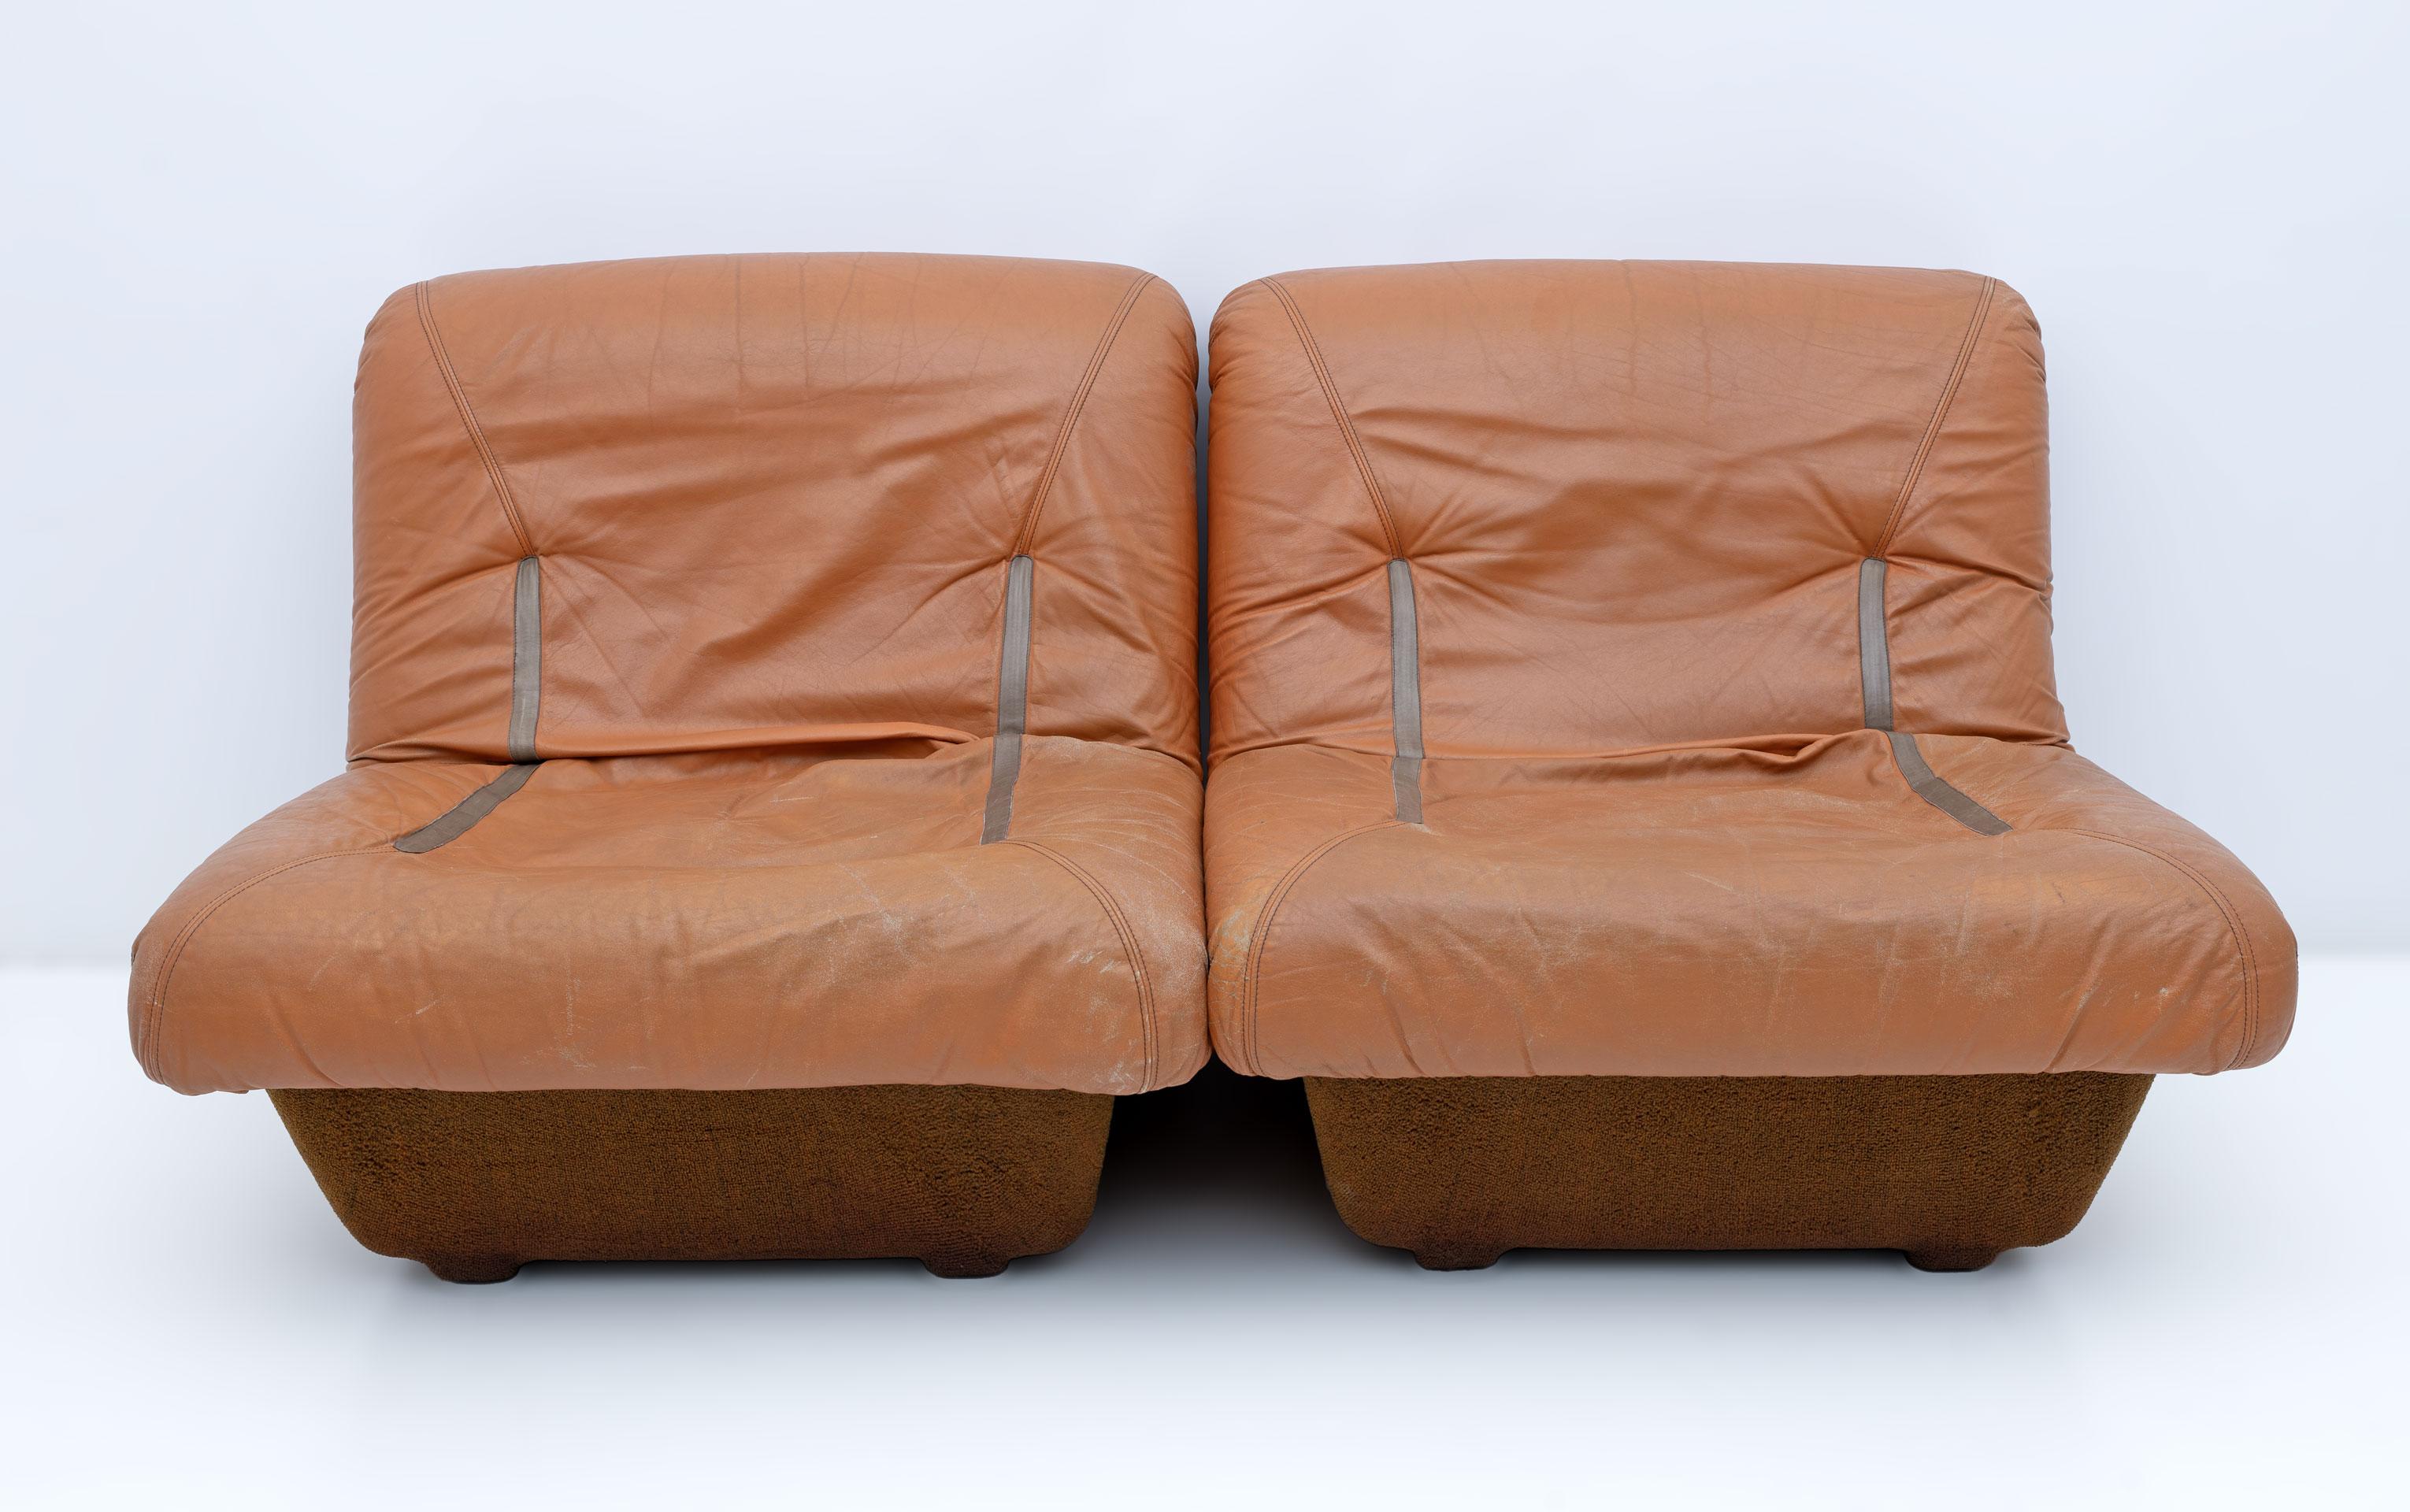 Modular sofa composed of 2 armchairs in real leather with removable covers with fiberglass structure covered in brown bouclé-type technical fabric. The leather appears, as in the photo, worn by time and use but very resistant, soft and without cuts,